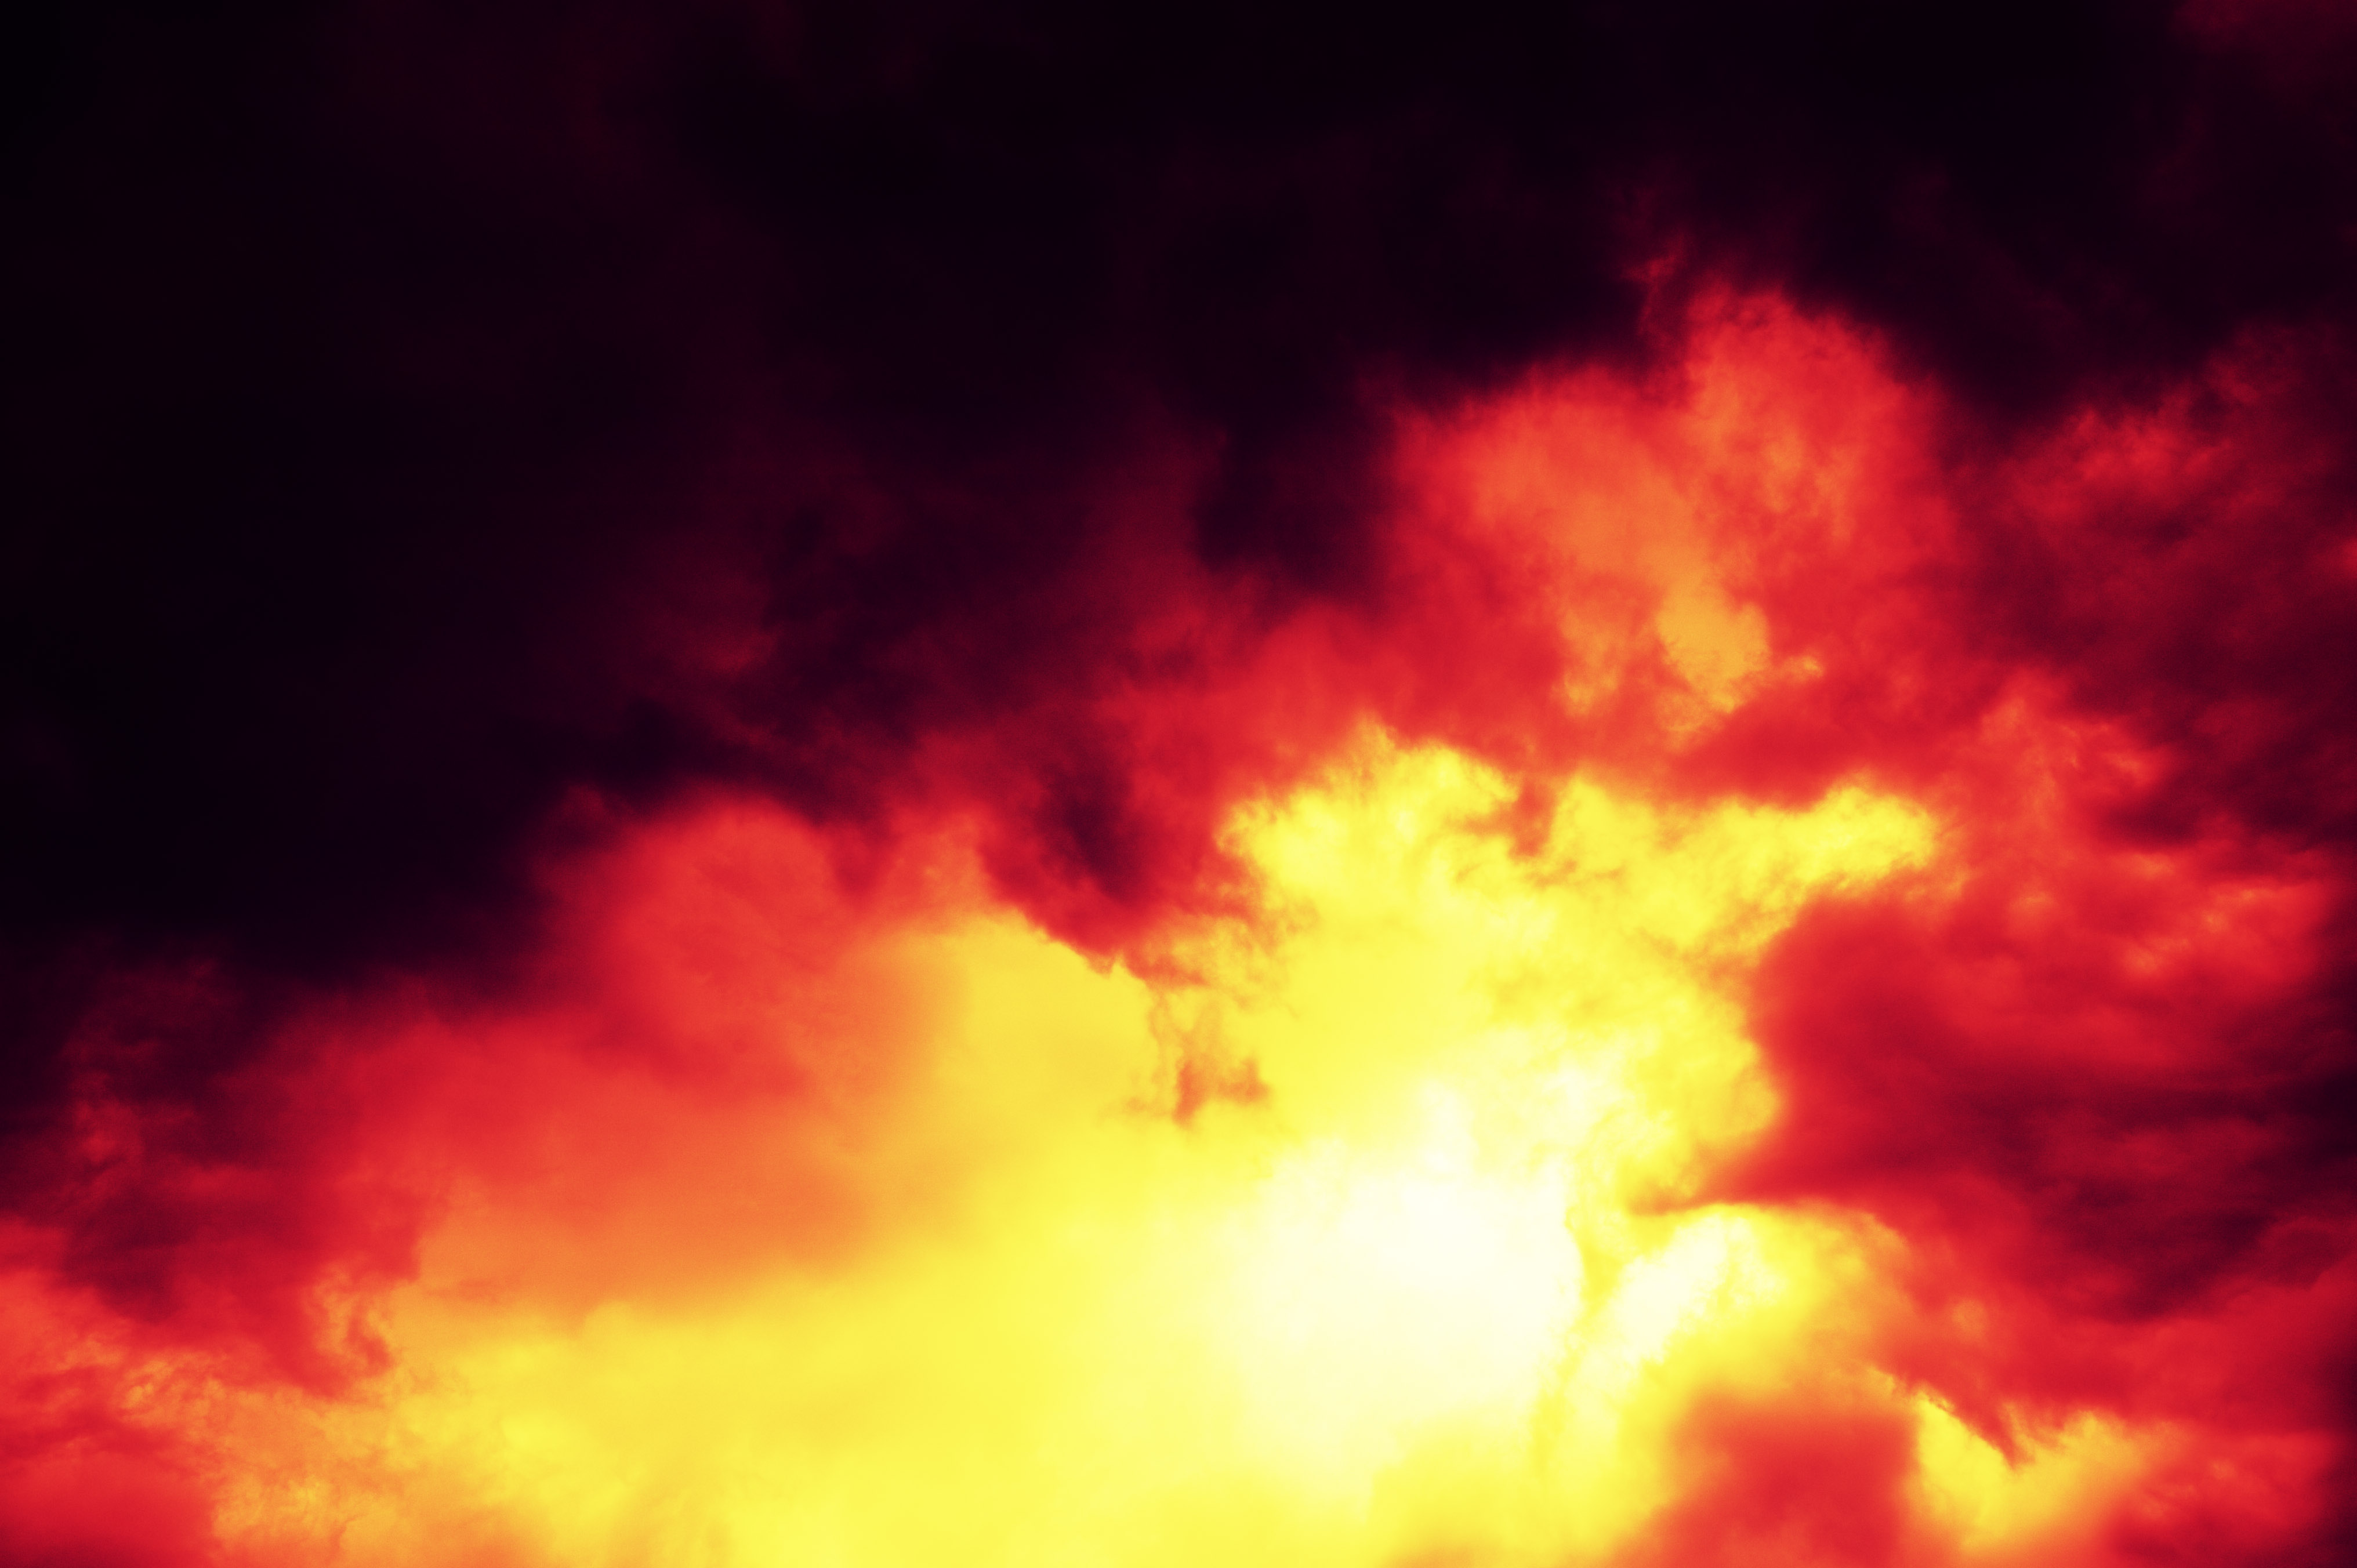 photo,material,free,landscape,picture,stock photo,Creative Commons,The cloud which flares up, nebula, cloud, Shadow, Flame